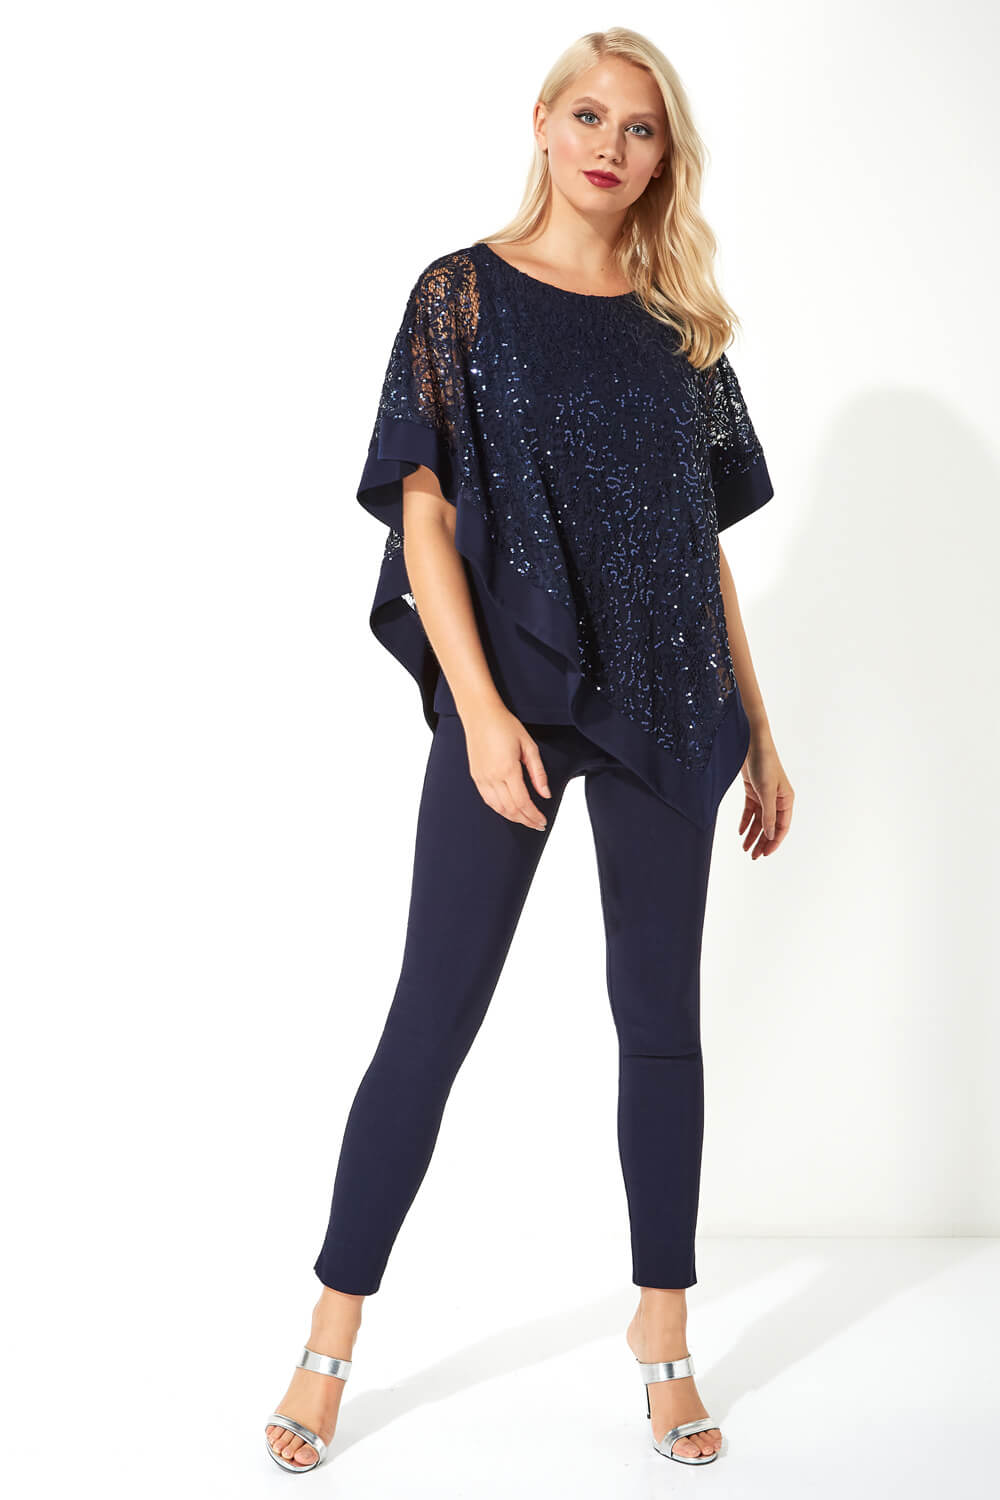 Midnight Blue Sequin Embellished Overlay Top, Image 2 of 5